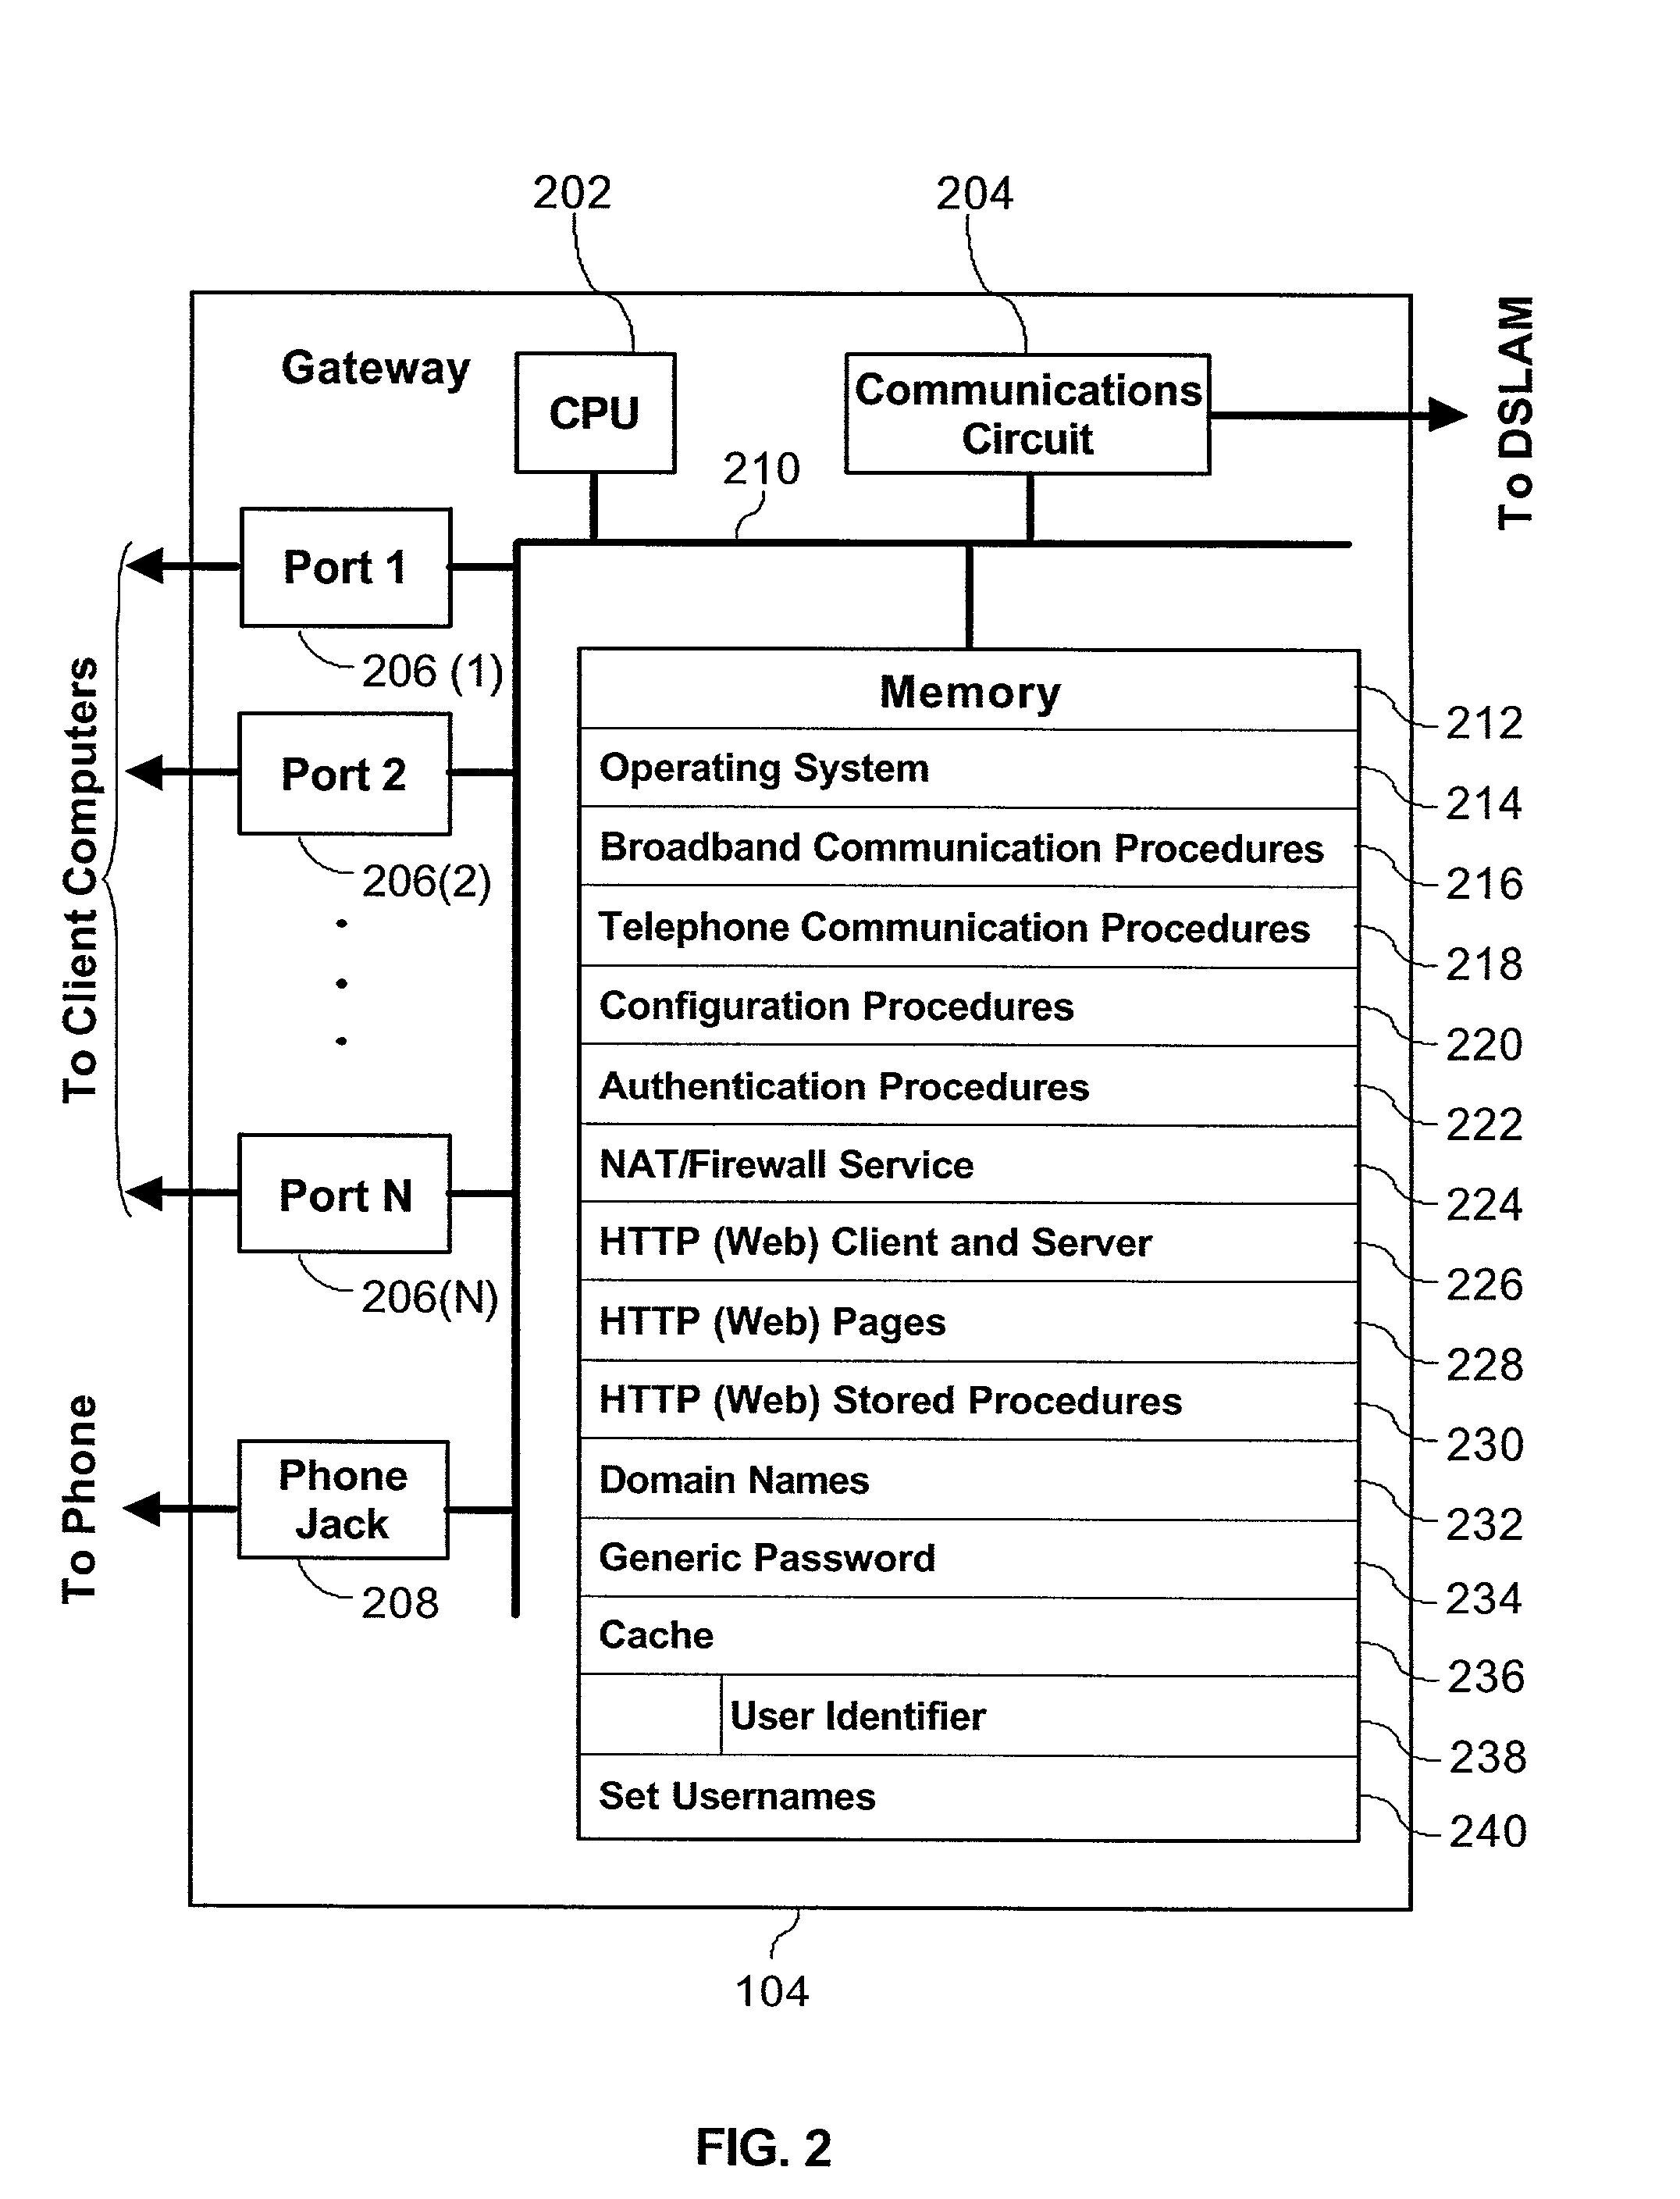 System and method for provisioning broadband service in a PPPoE network using a list of stored domain names